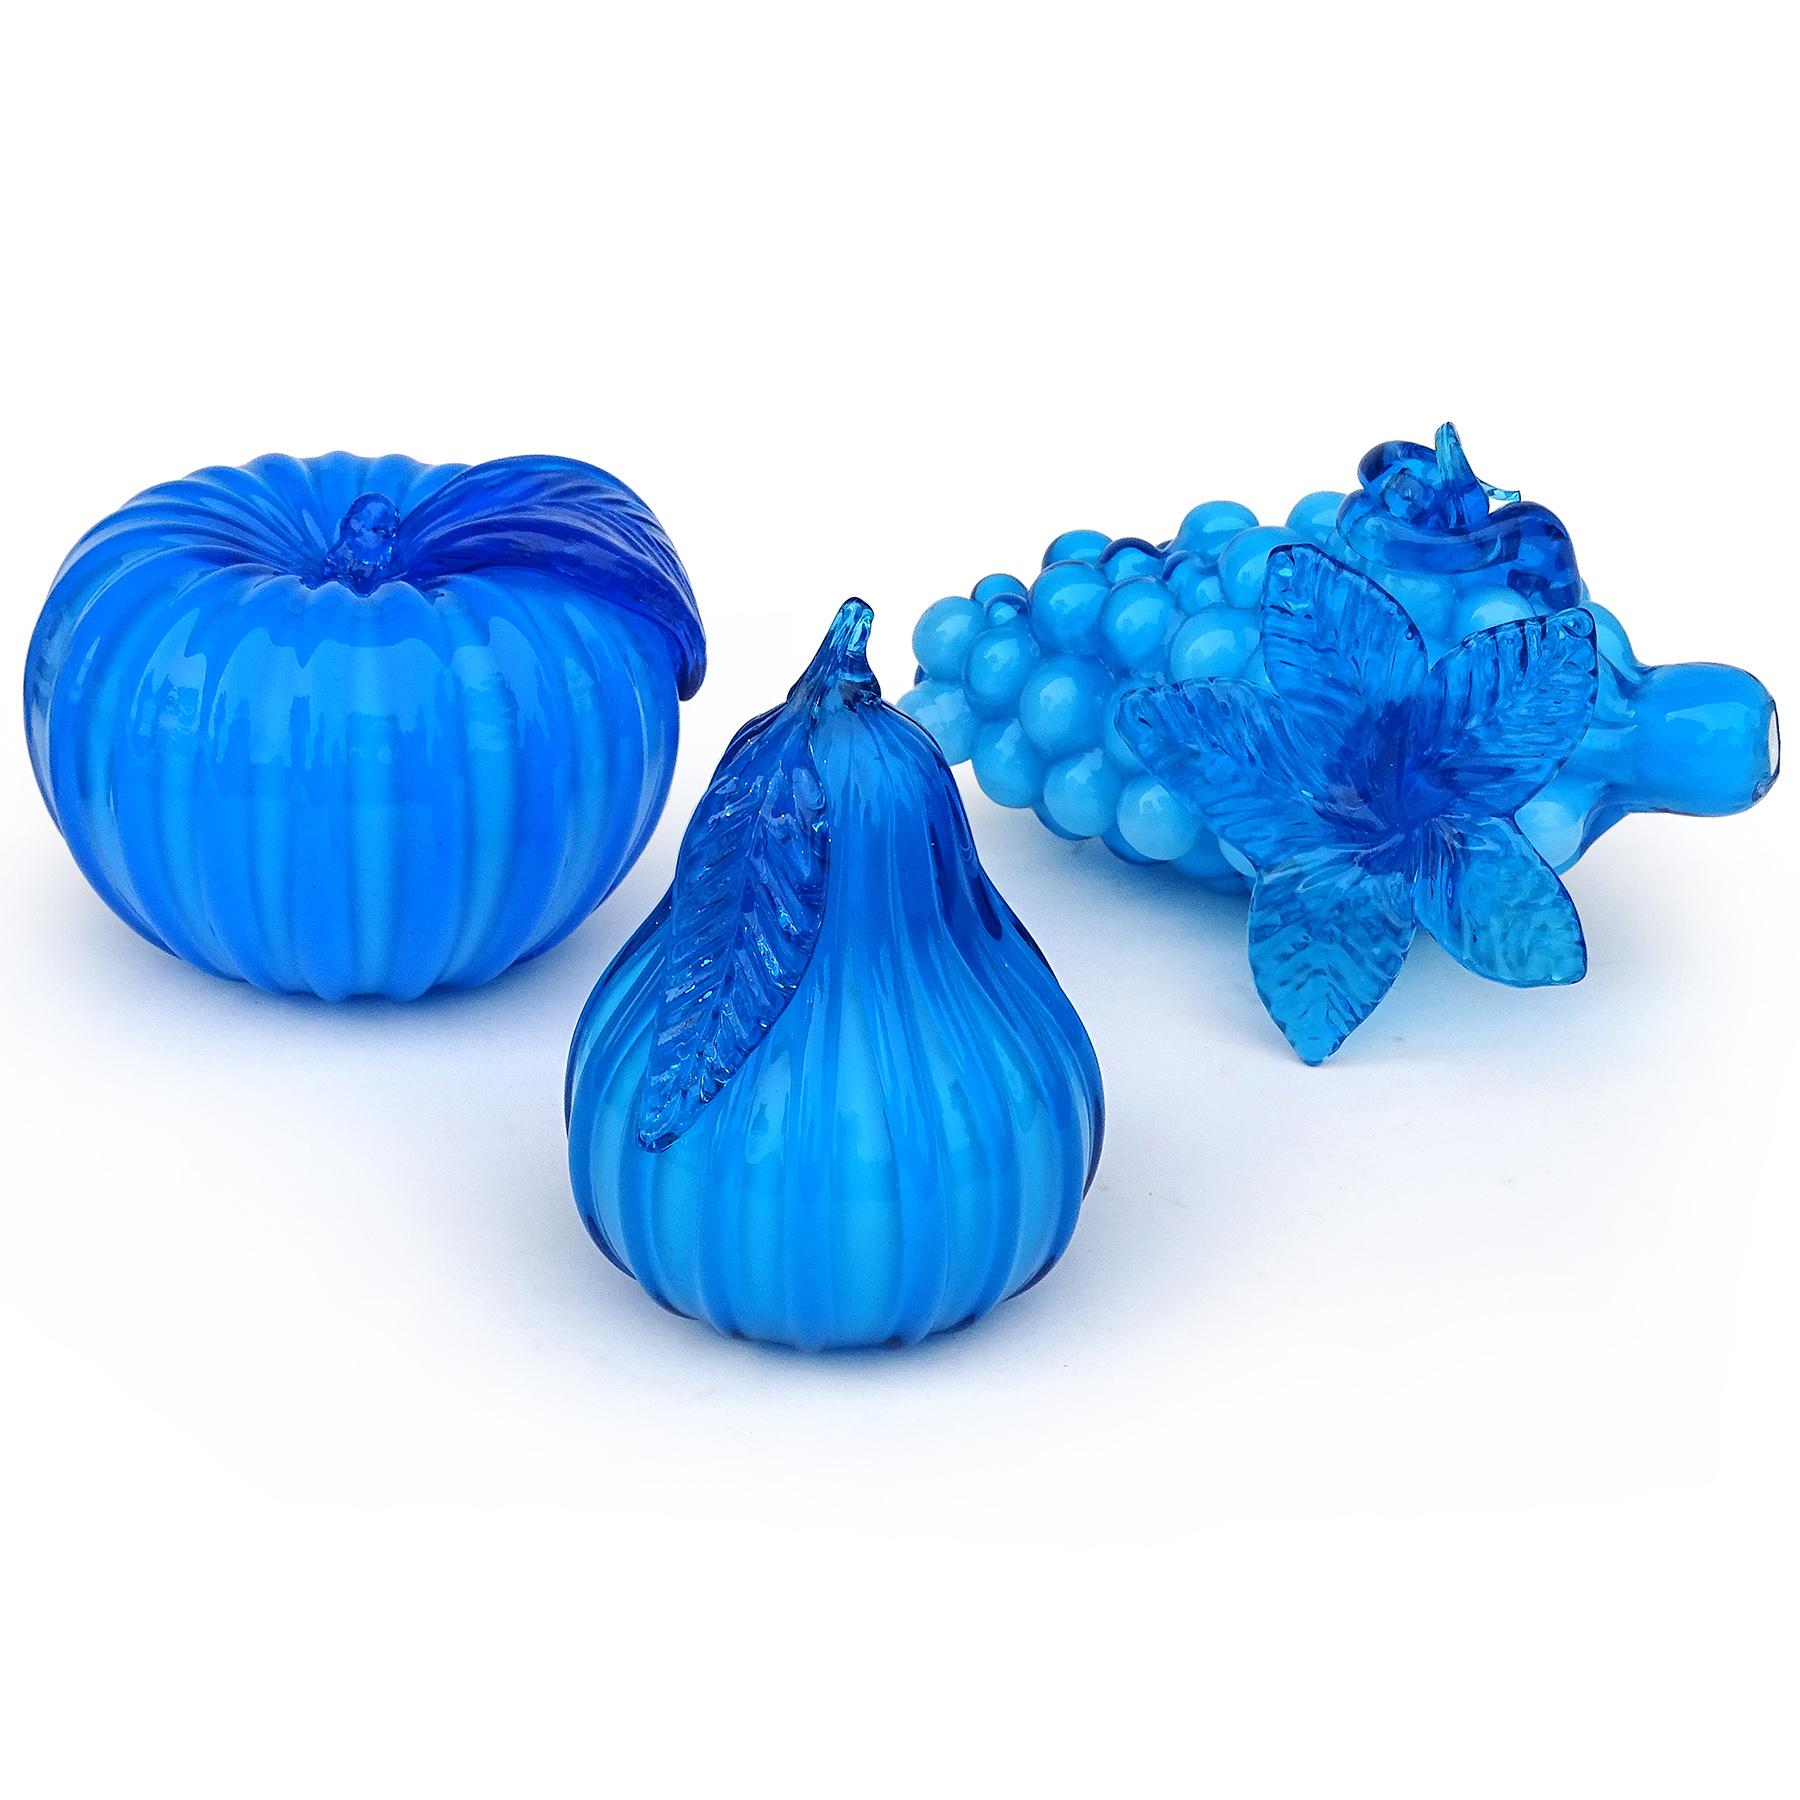 Beautiful vintage set of three hand blown electric blue Italian art glass fruit sculptural figural pieces. Attributed to the Empoli studio in Italy. The set includes a bunch of grapes with attached grape leaf and part of the vine curled on the side,